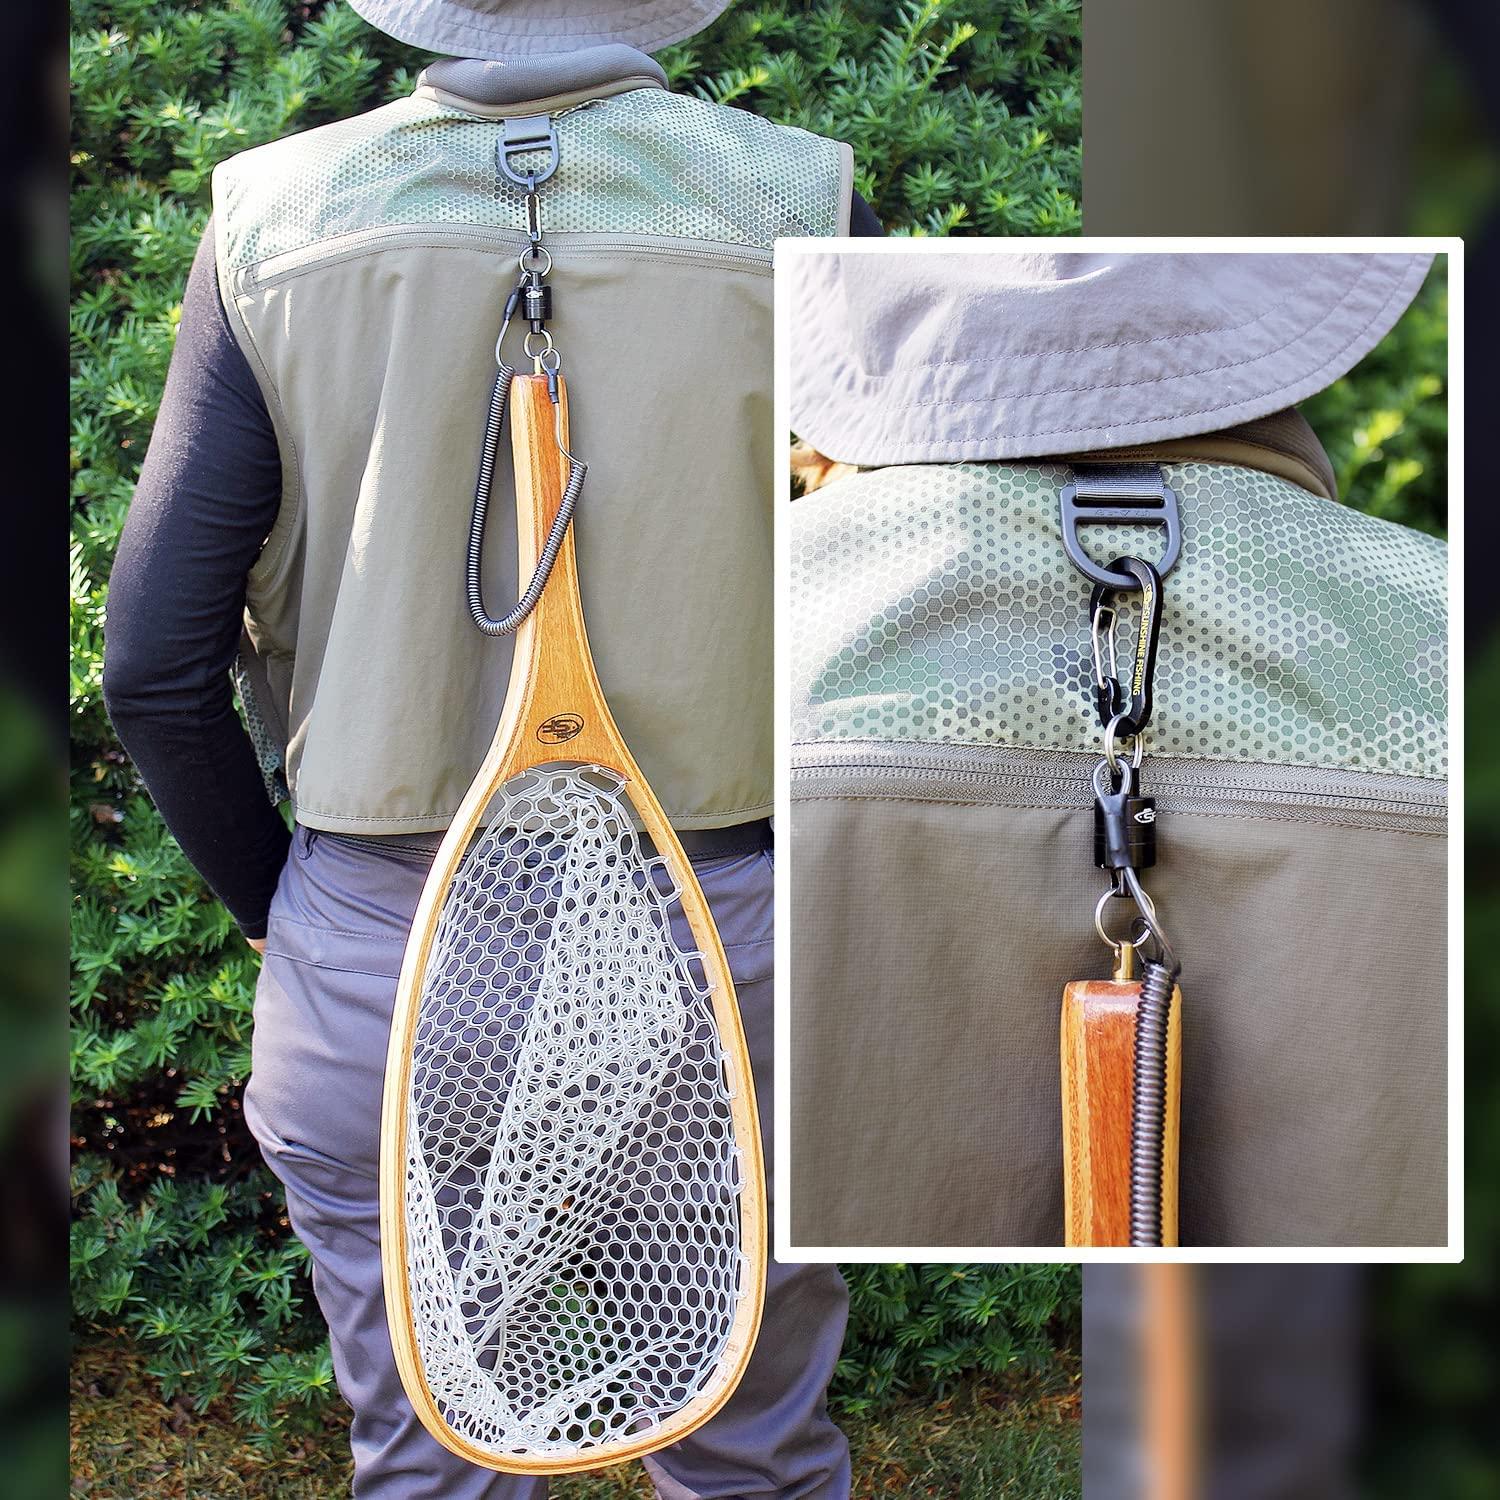 SF Fly Fishing Landing Net with Magnetic Release Curved Handle